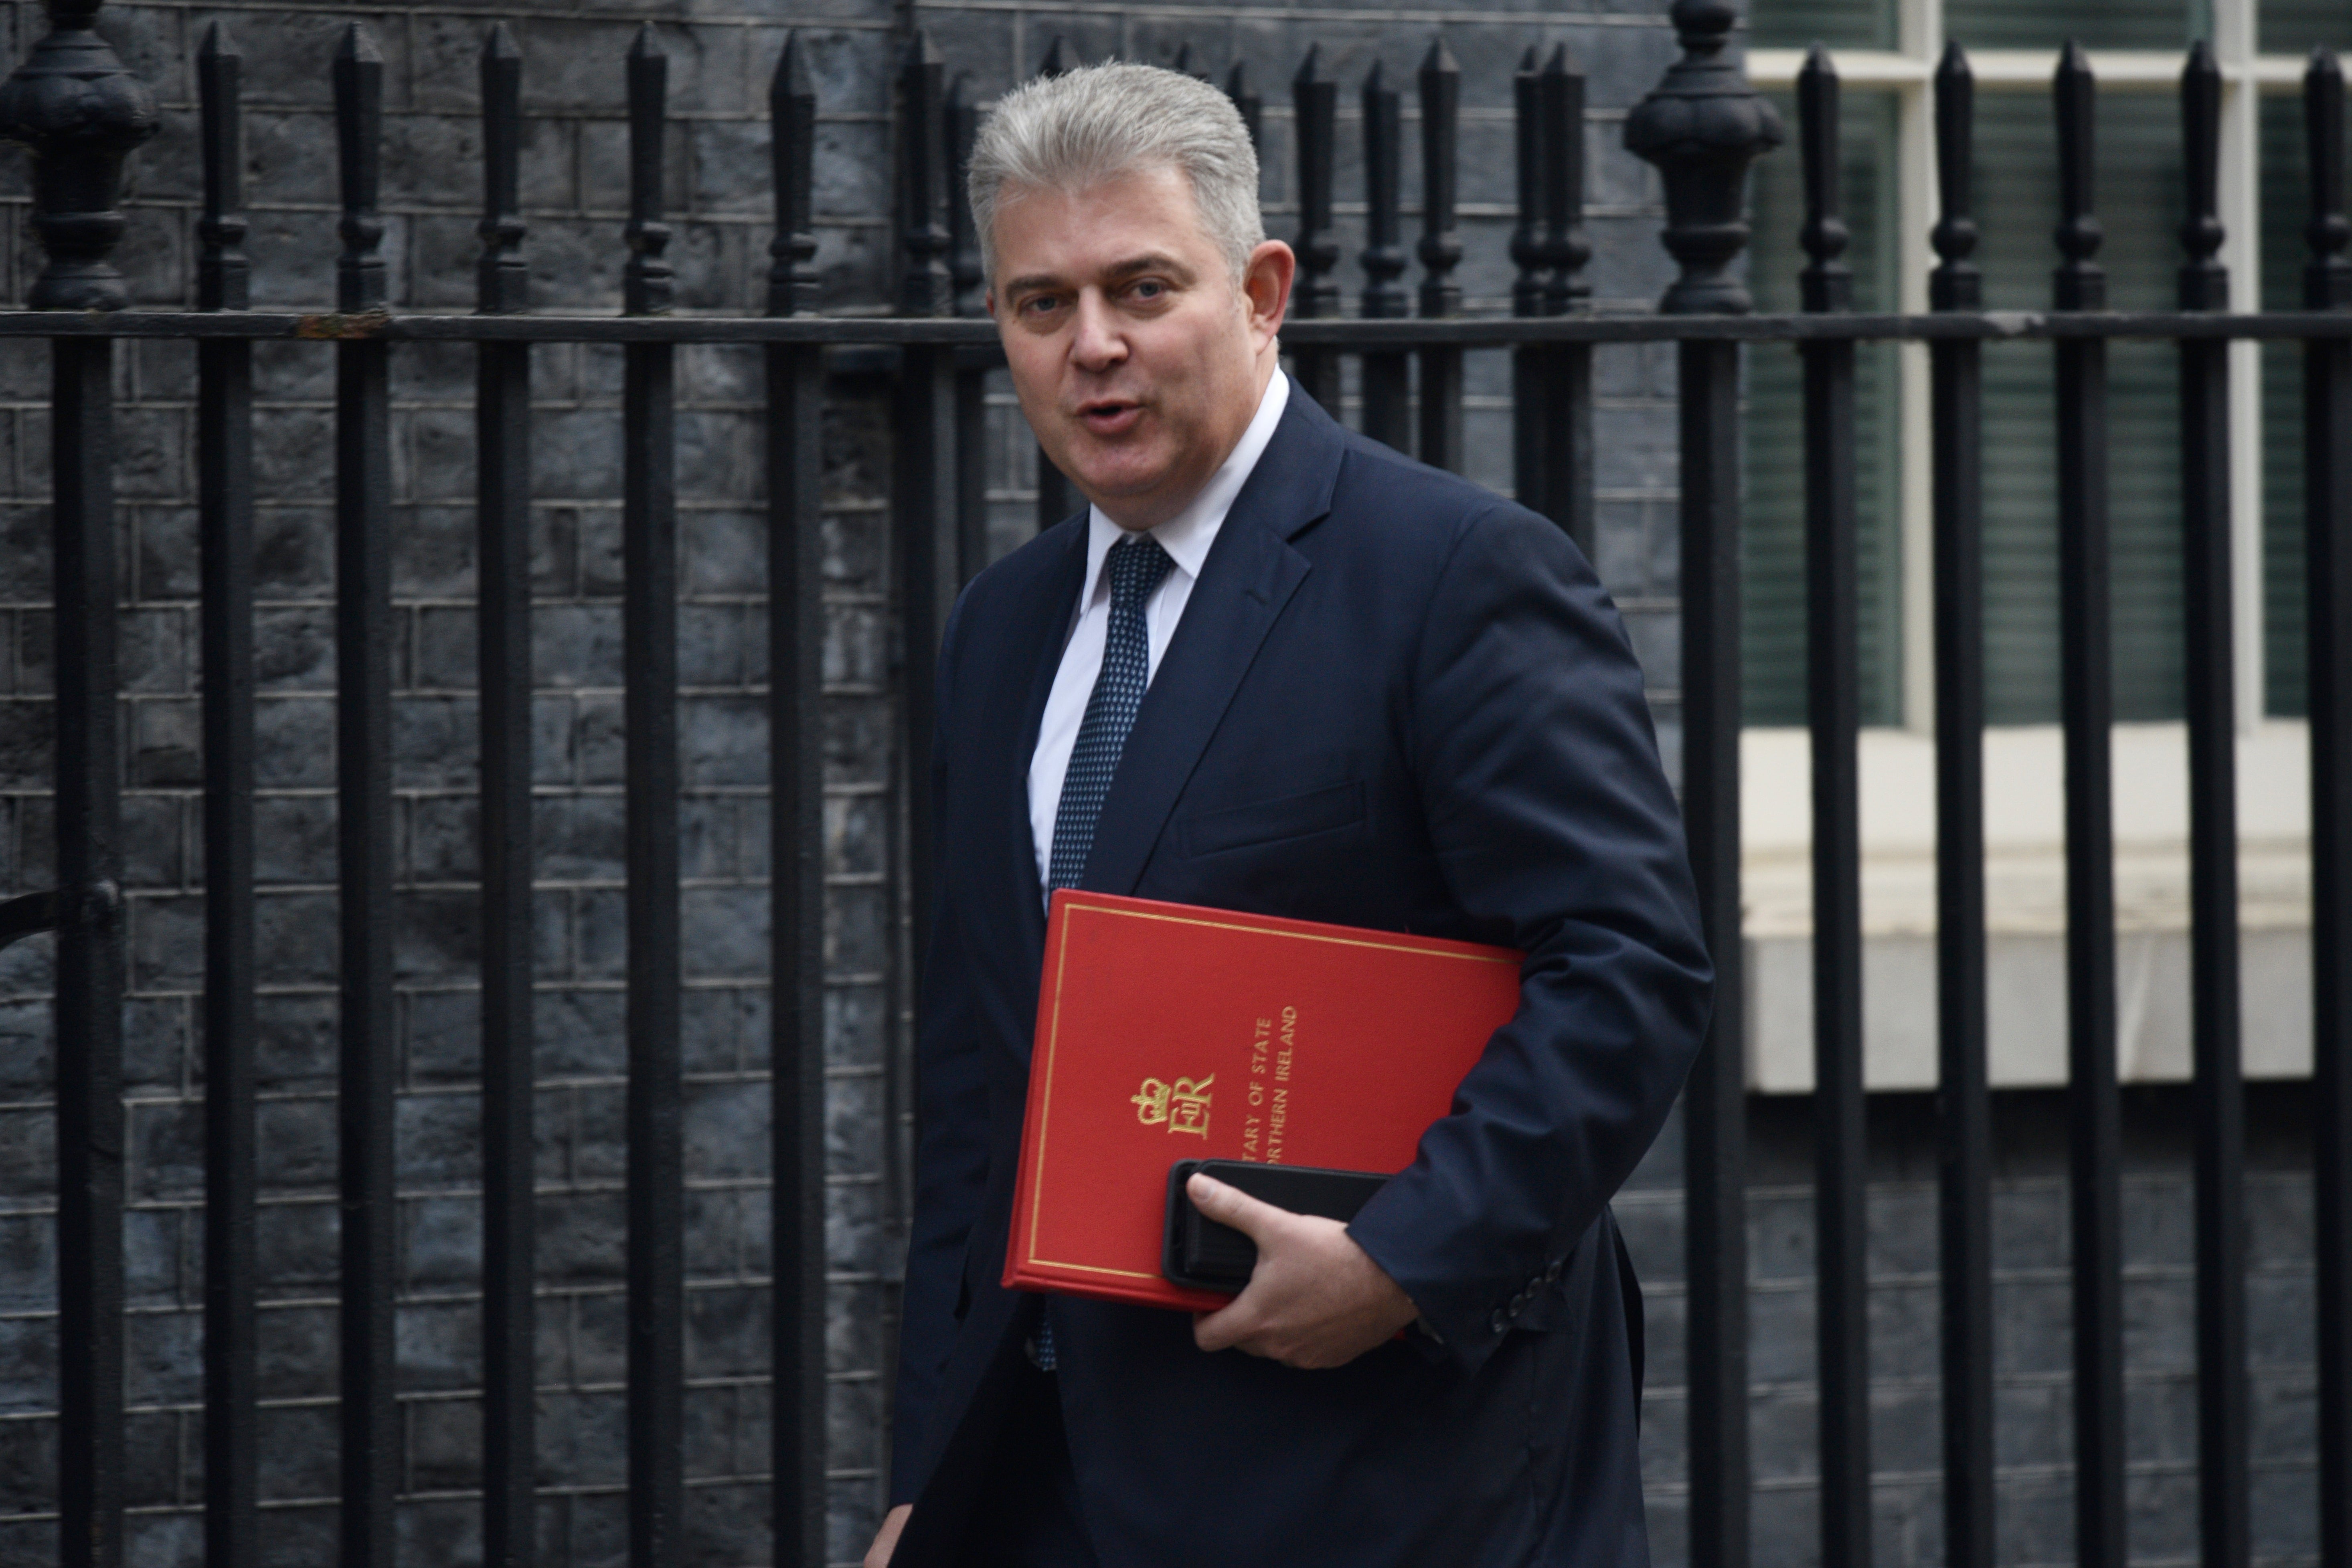 Northern Ireland Secretary Brandon Lewis said the protocol needed to be changed to be made sustainable